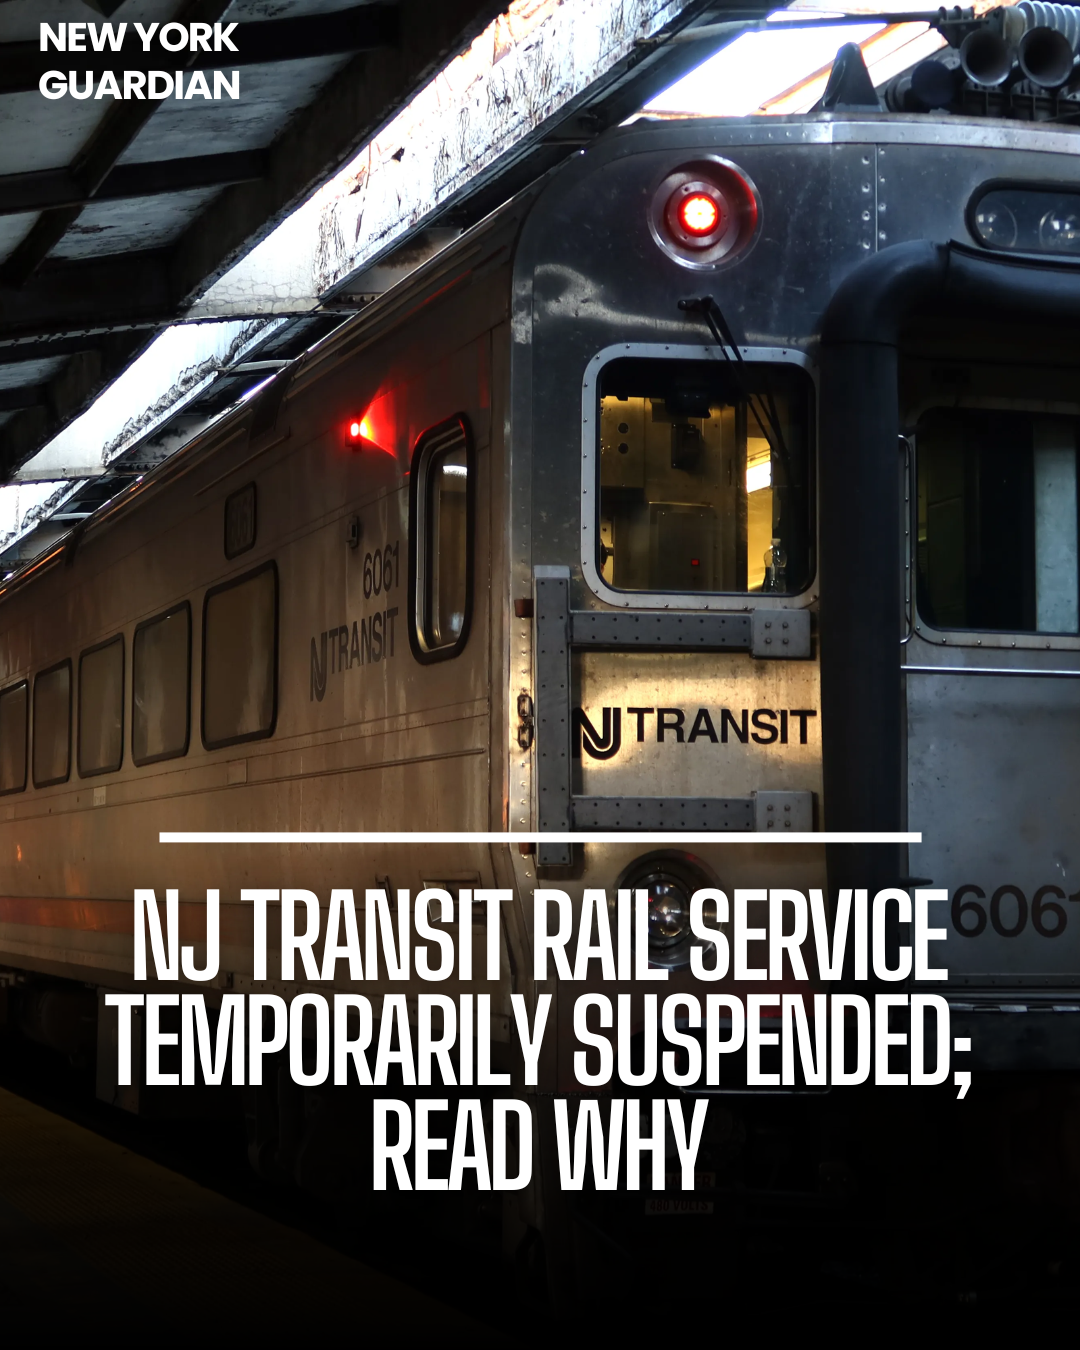 NJ Transit rail service was briefly suspended in and out of NY Penn Station due to Amtrak track problems.